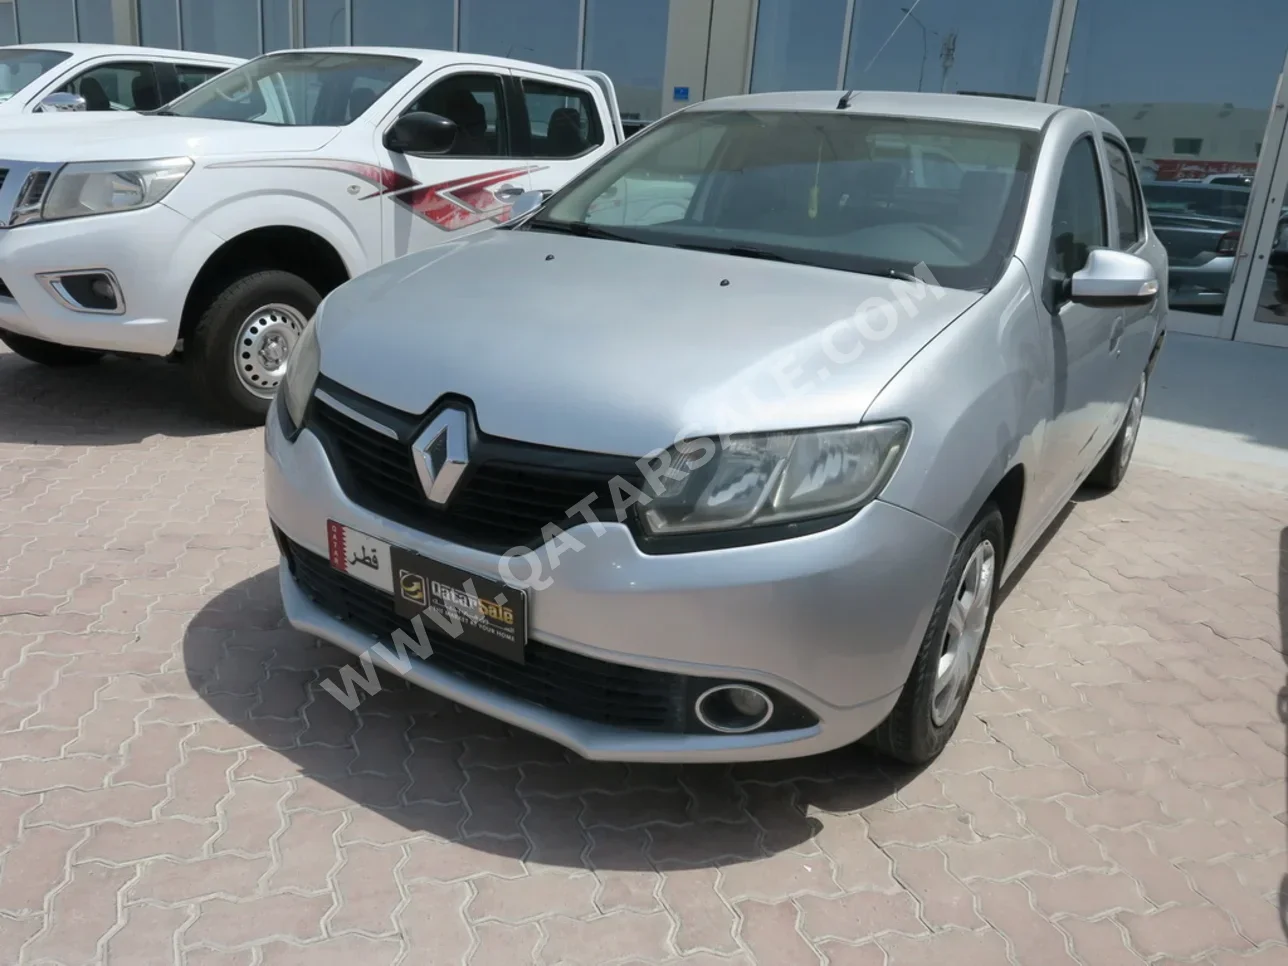 Renault  Symbol  2016  Automatic  123,000 Km  4 Cylinder  Front Wheel Drive (FWD)  Sedan  Silver